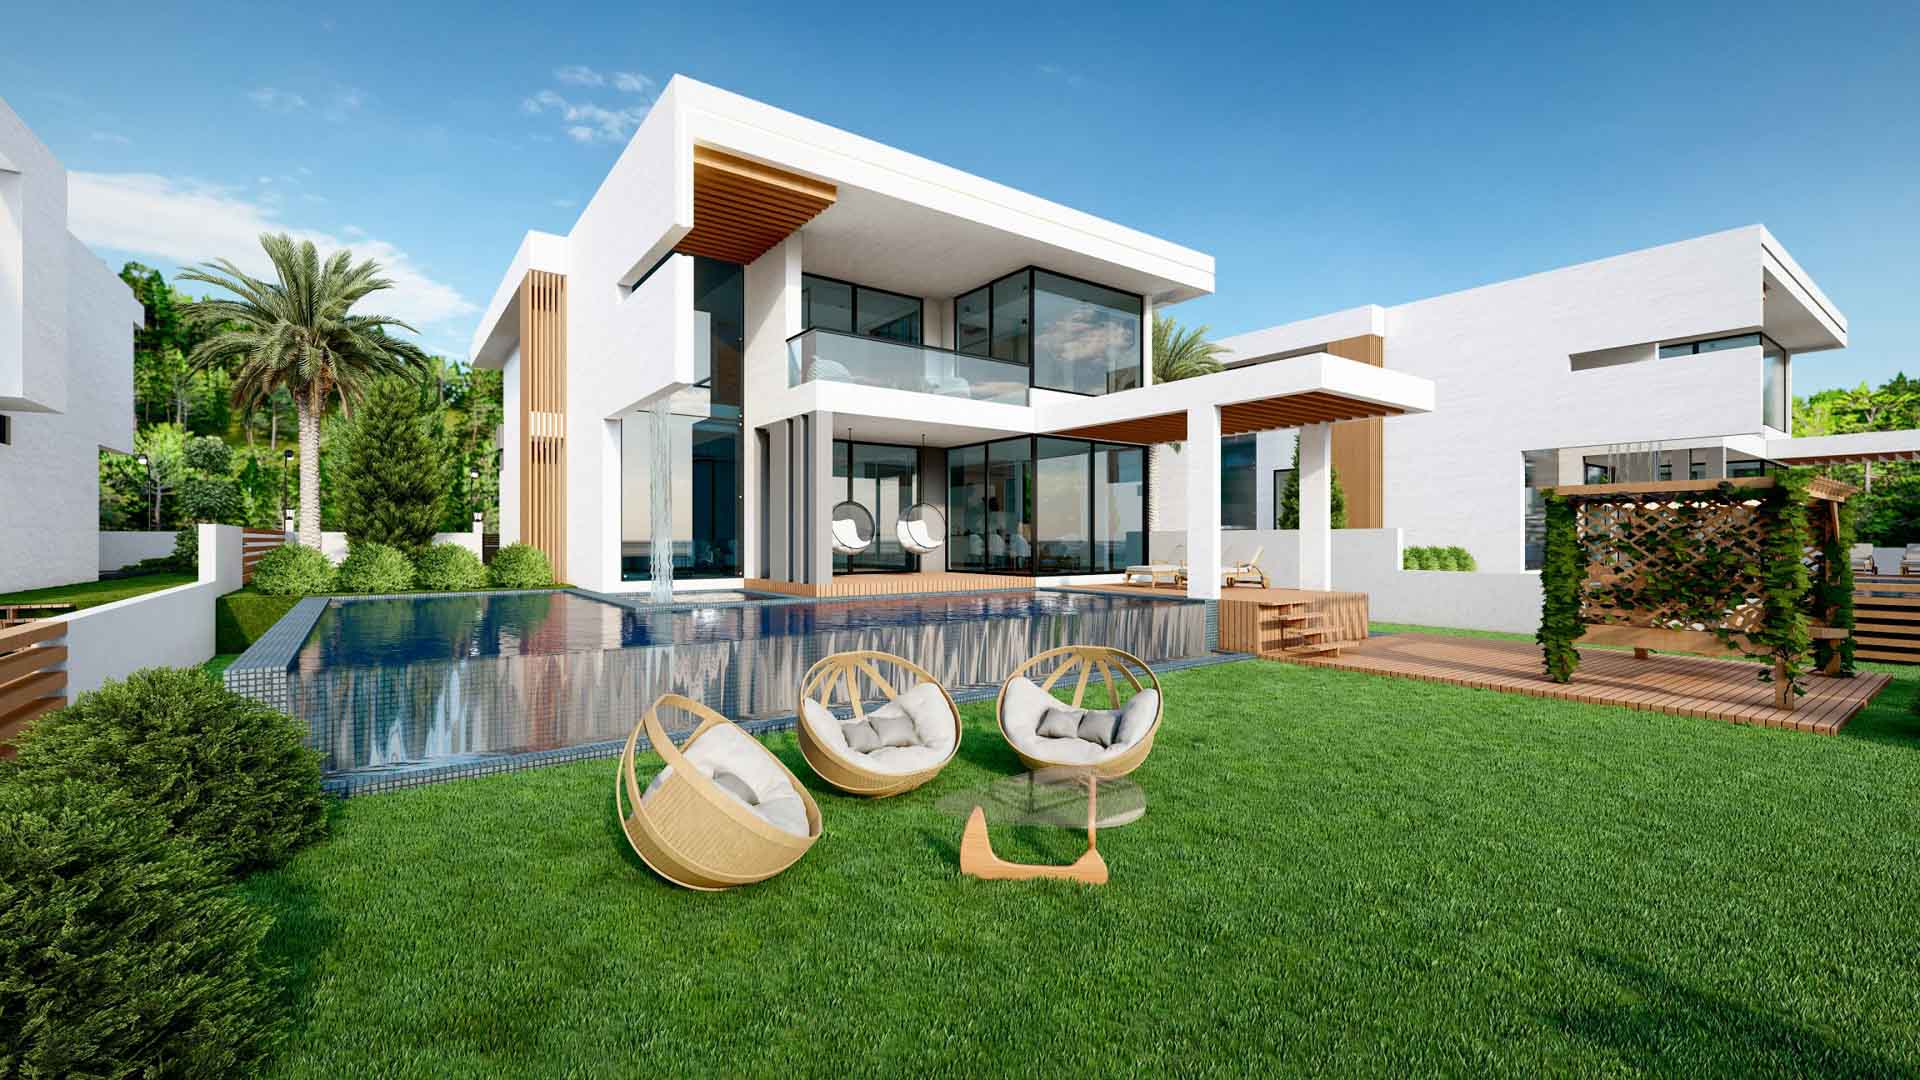 id983-two-storey-41-villas-with-a-garden-and-a-swimming-pool-in-demirtas-area (34)